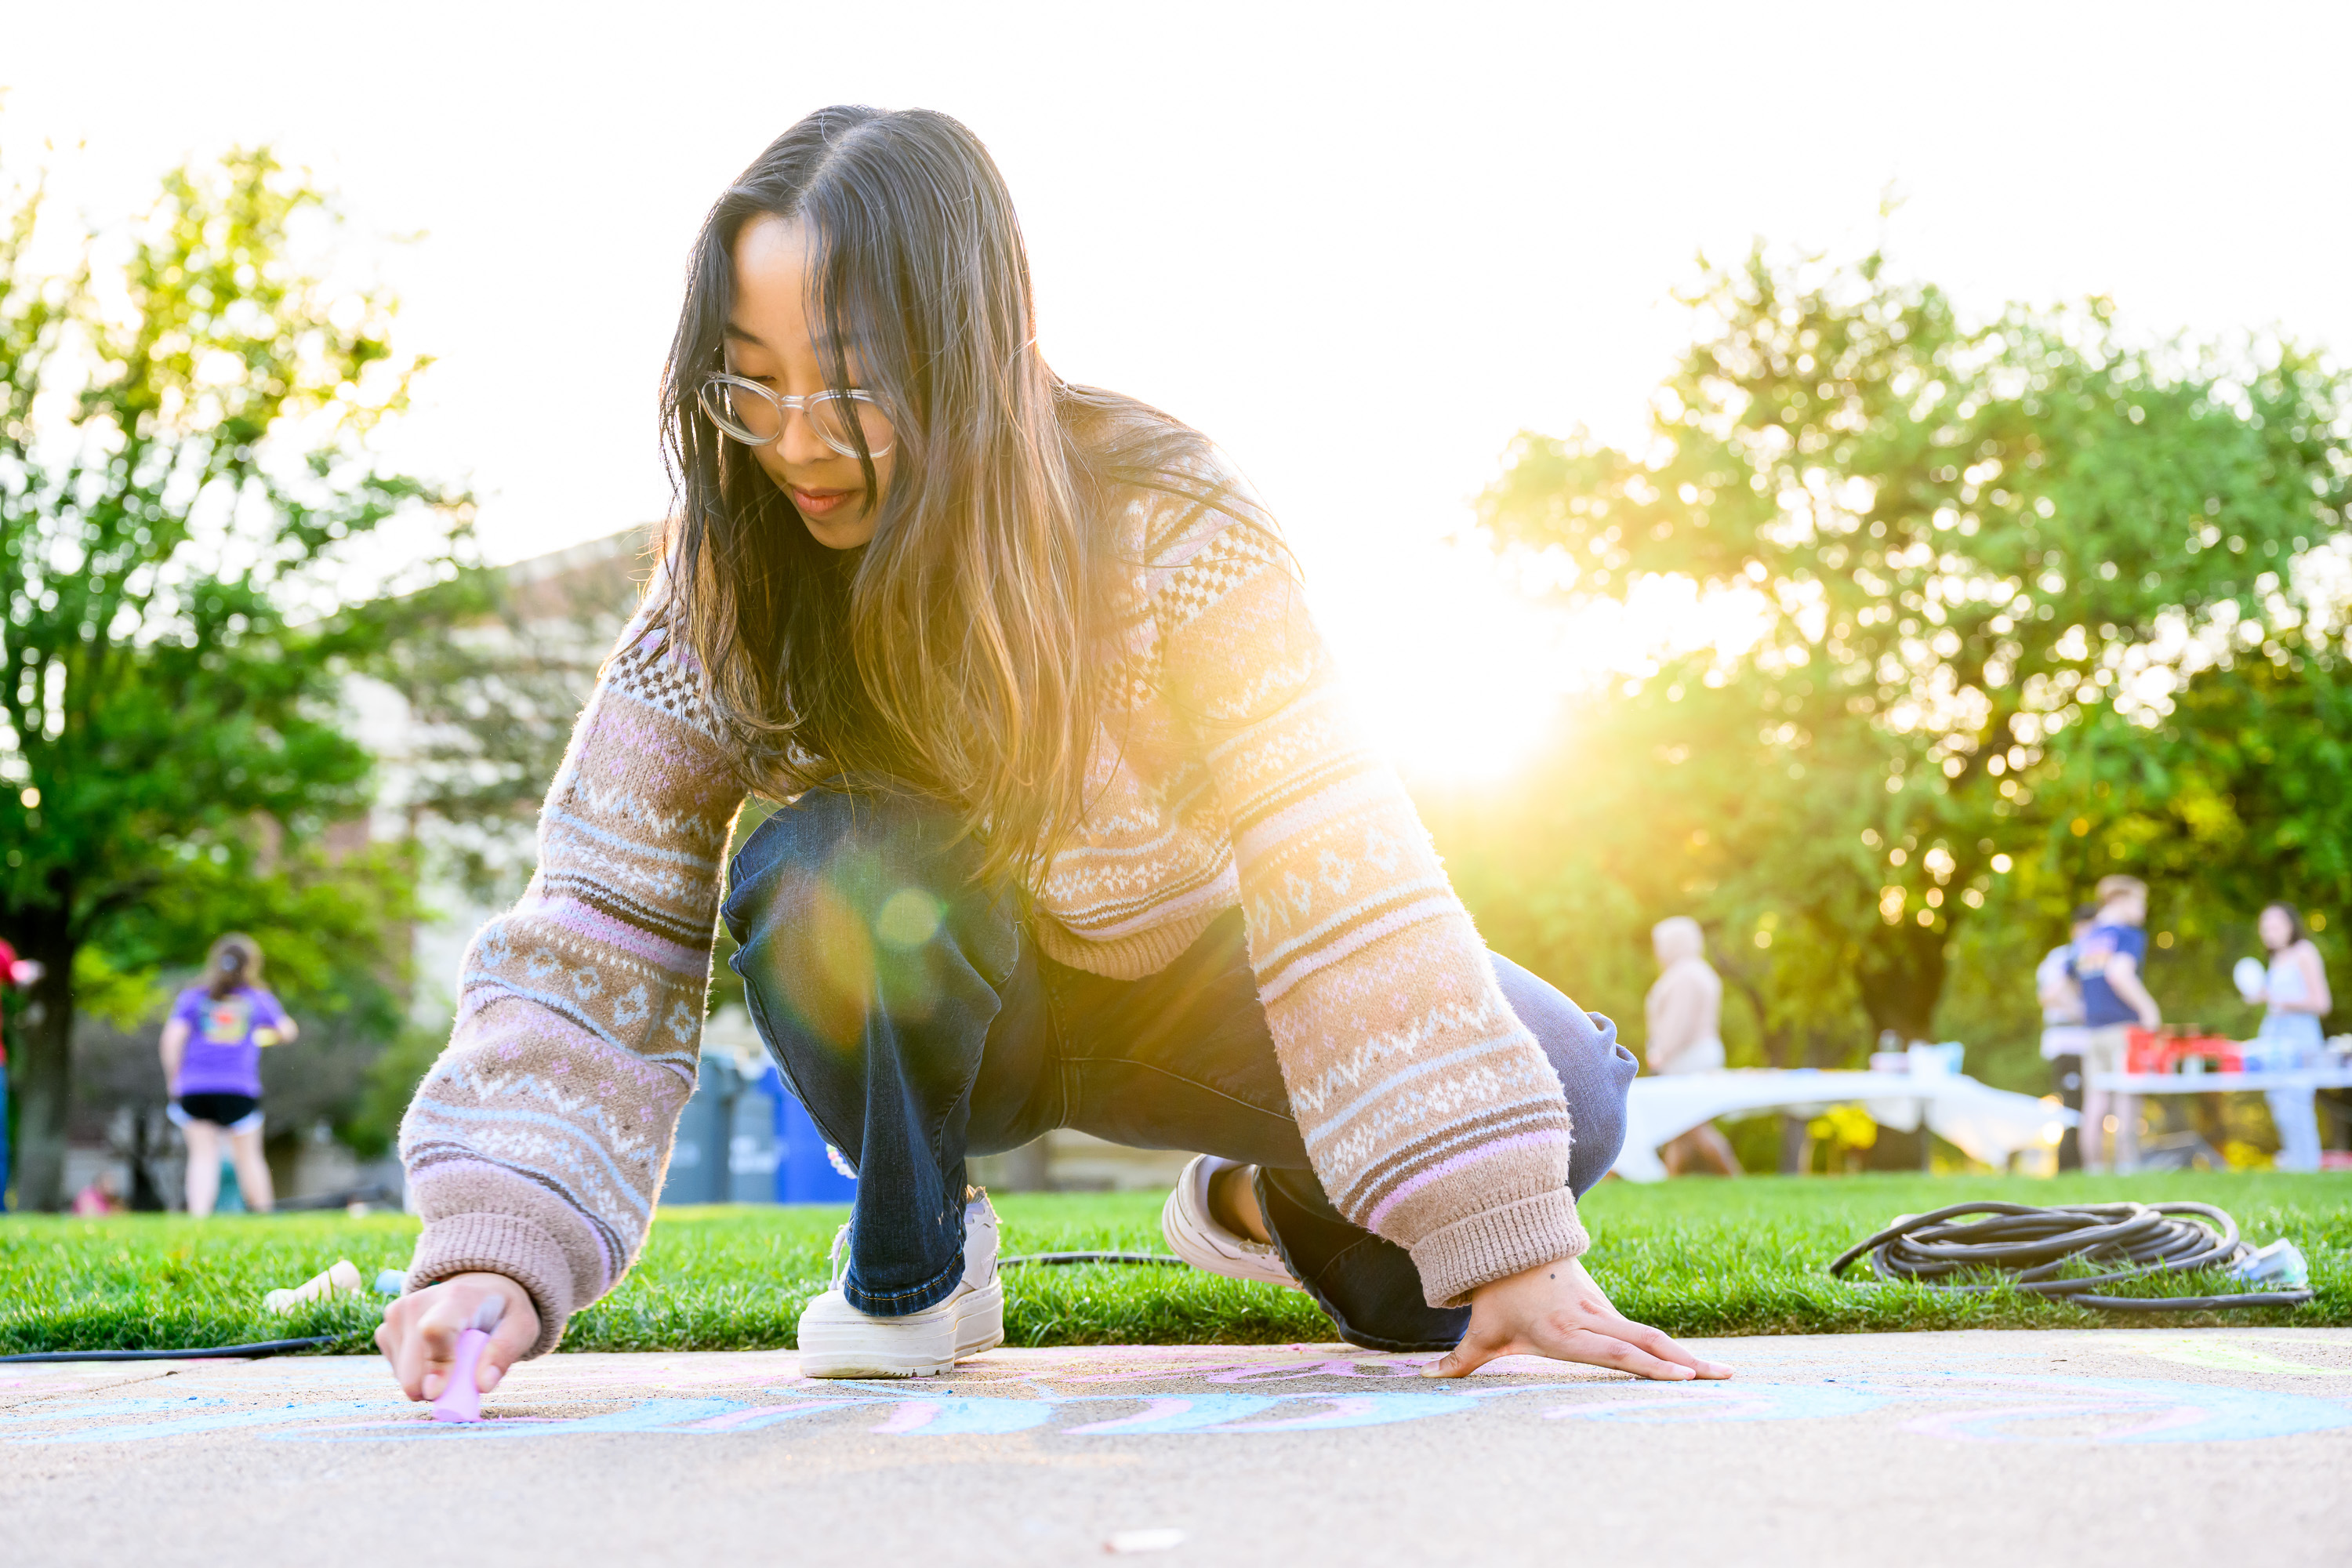 student drawing on sidewalk with chalk outside with sun shining and green grass and trees in the background